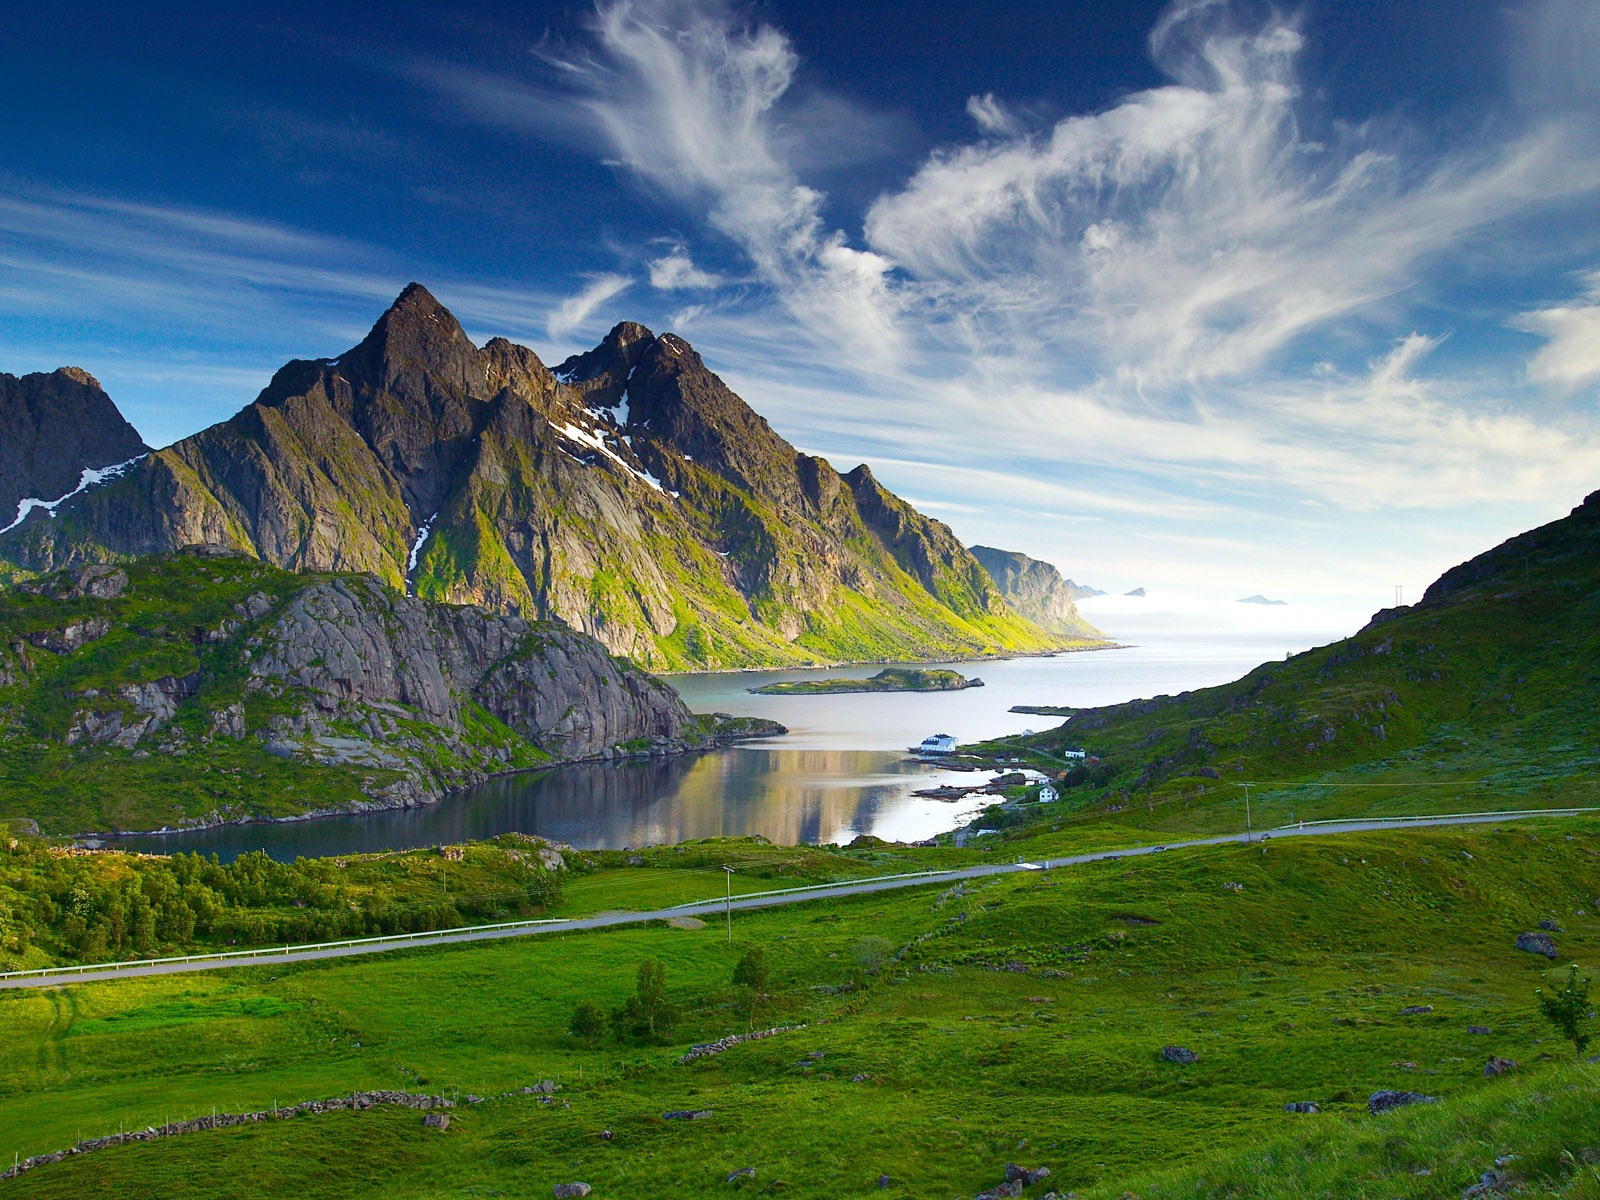 Windows 7 Wallpapers: Nordic Landscapes #1 - 1600x1200